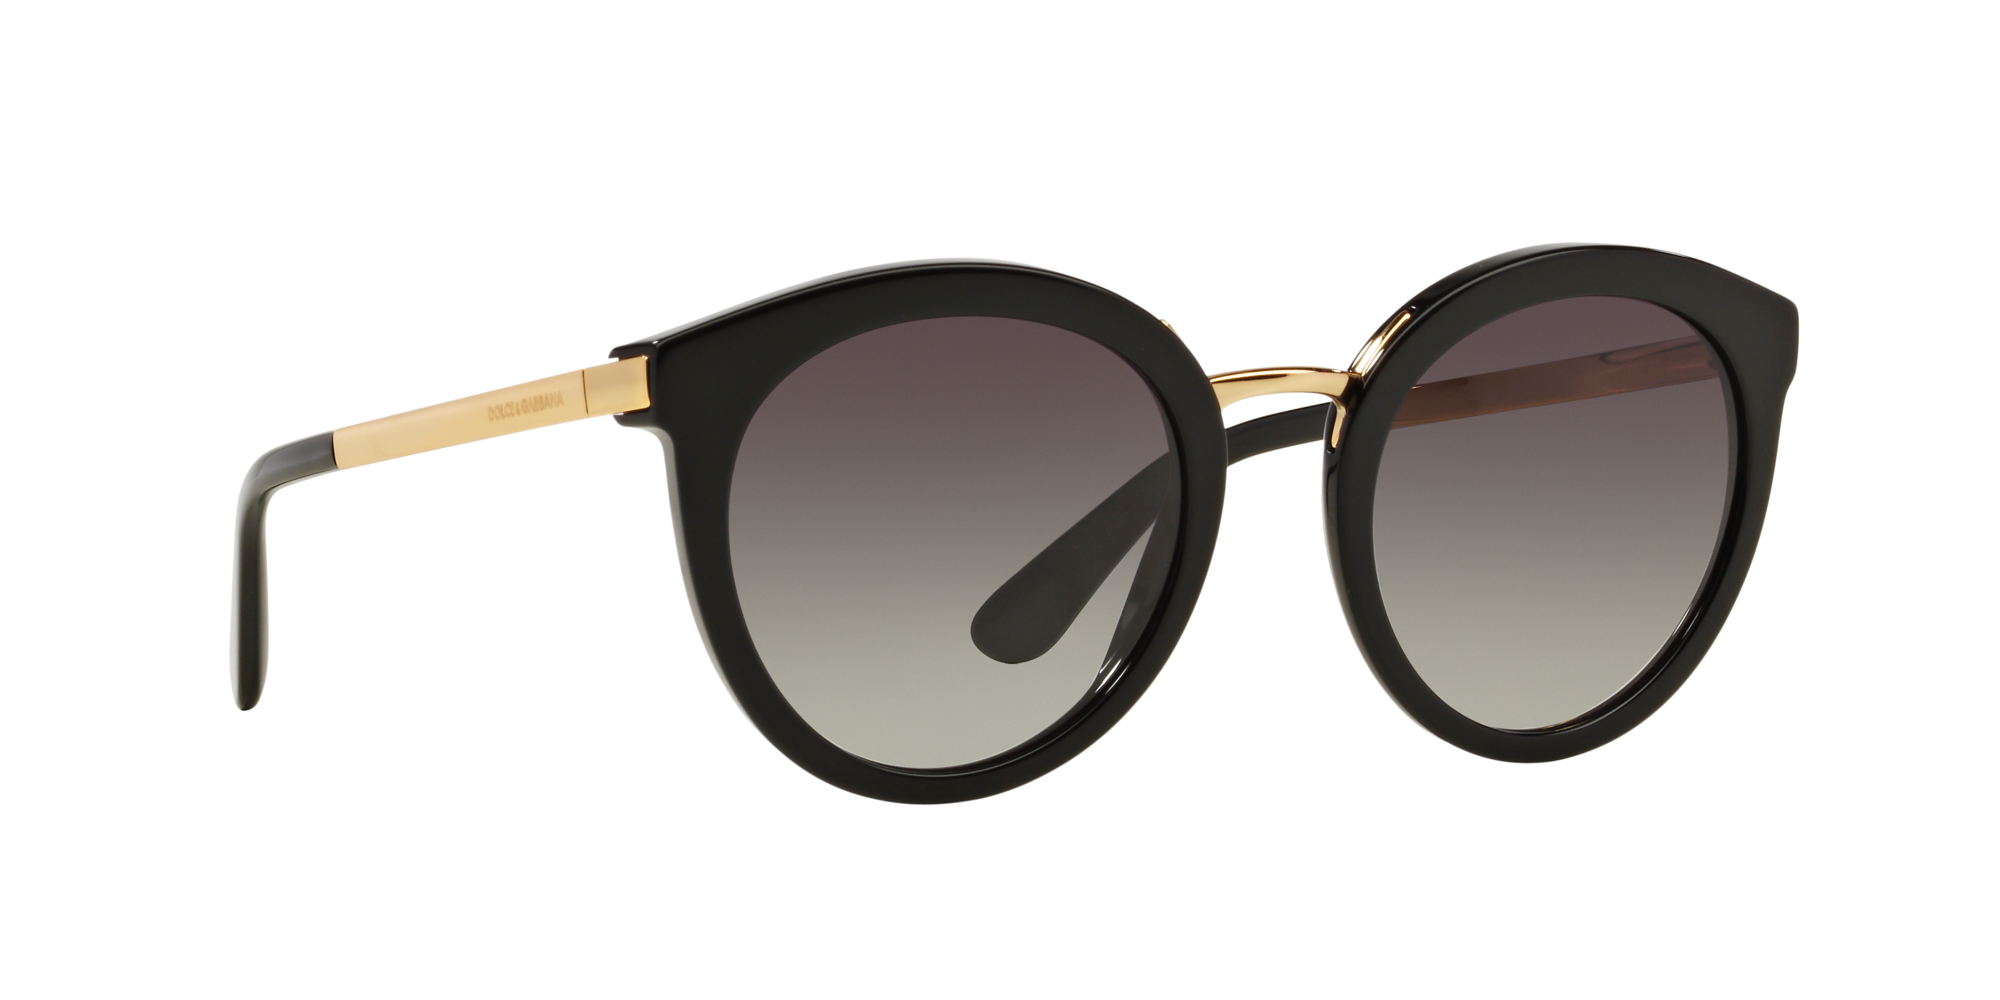 [products.image.angle_right01] DOLCE & GABBANA DG4268 501/8G